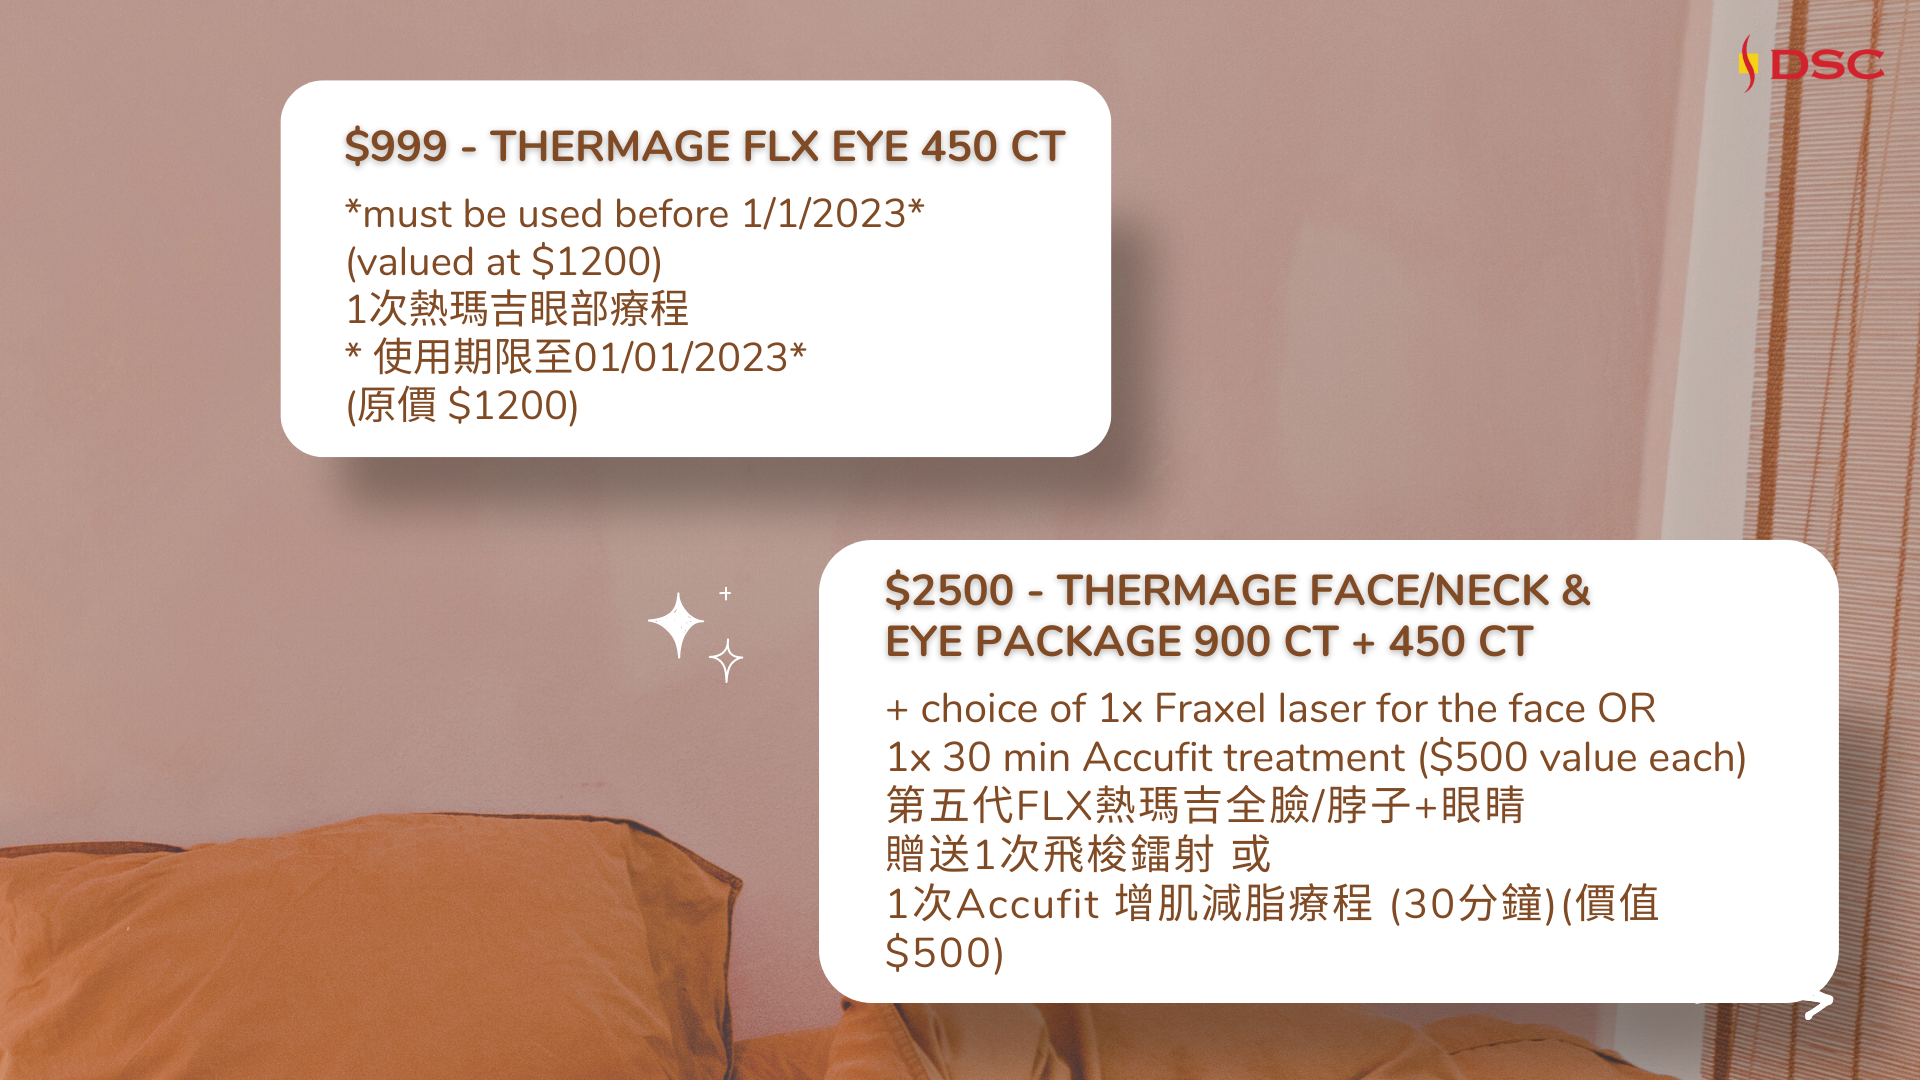 Thermage FLX Eye & face and neck graphic featuring DSC Black Friday and 11/11 deal of $999 for thermage eye and $2500 for face, neck and eye with 1x accufit or 1x fraxel laser free